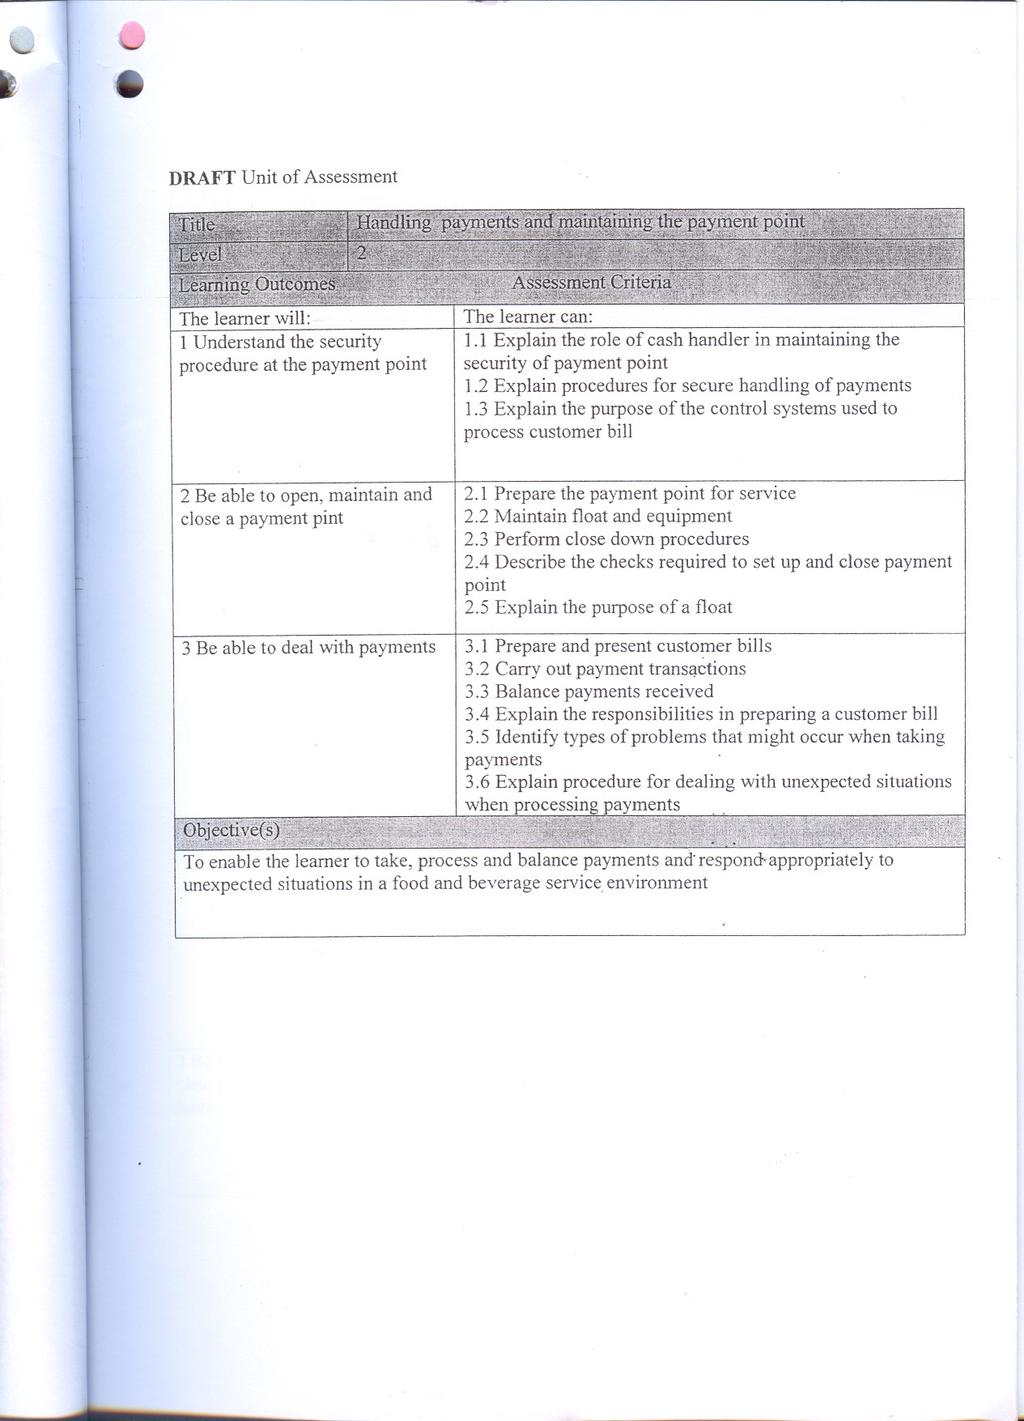 DRAFT Unit of Assessment The learner will: 1 Understand the security procedure at the payment point The learner can: ].